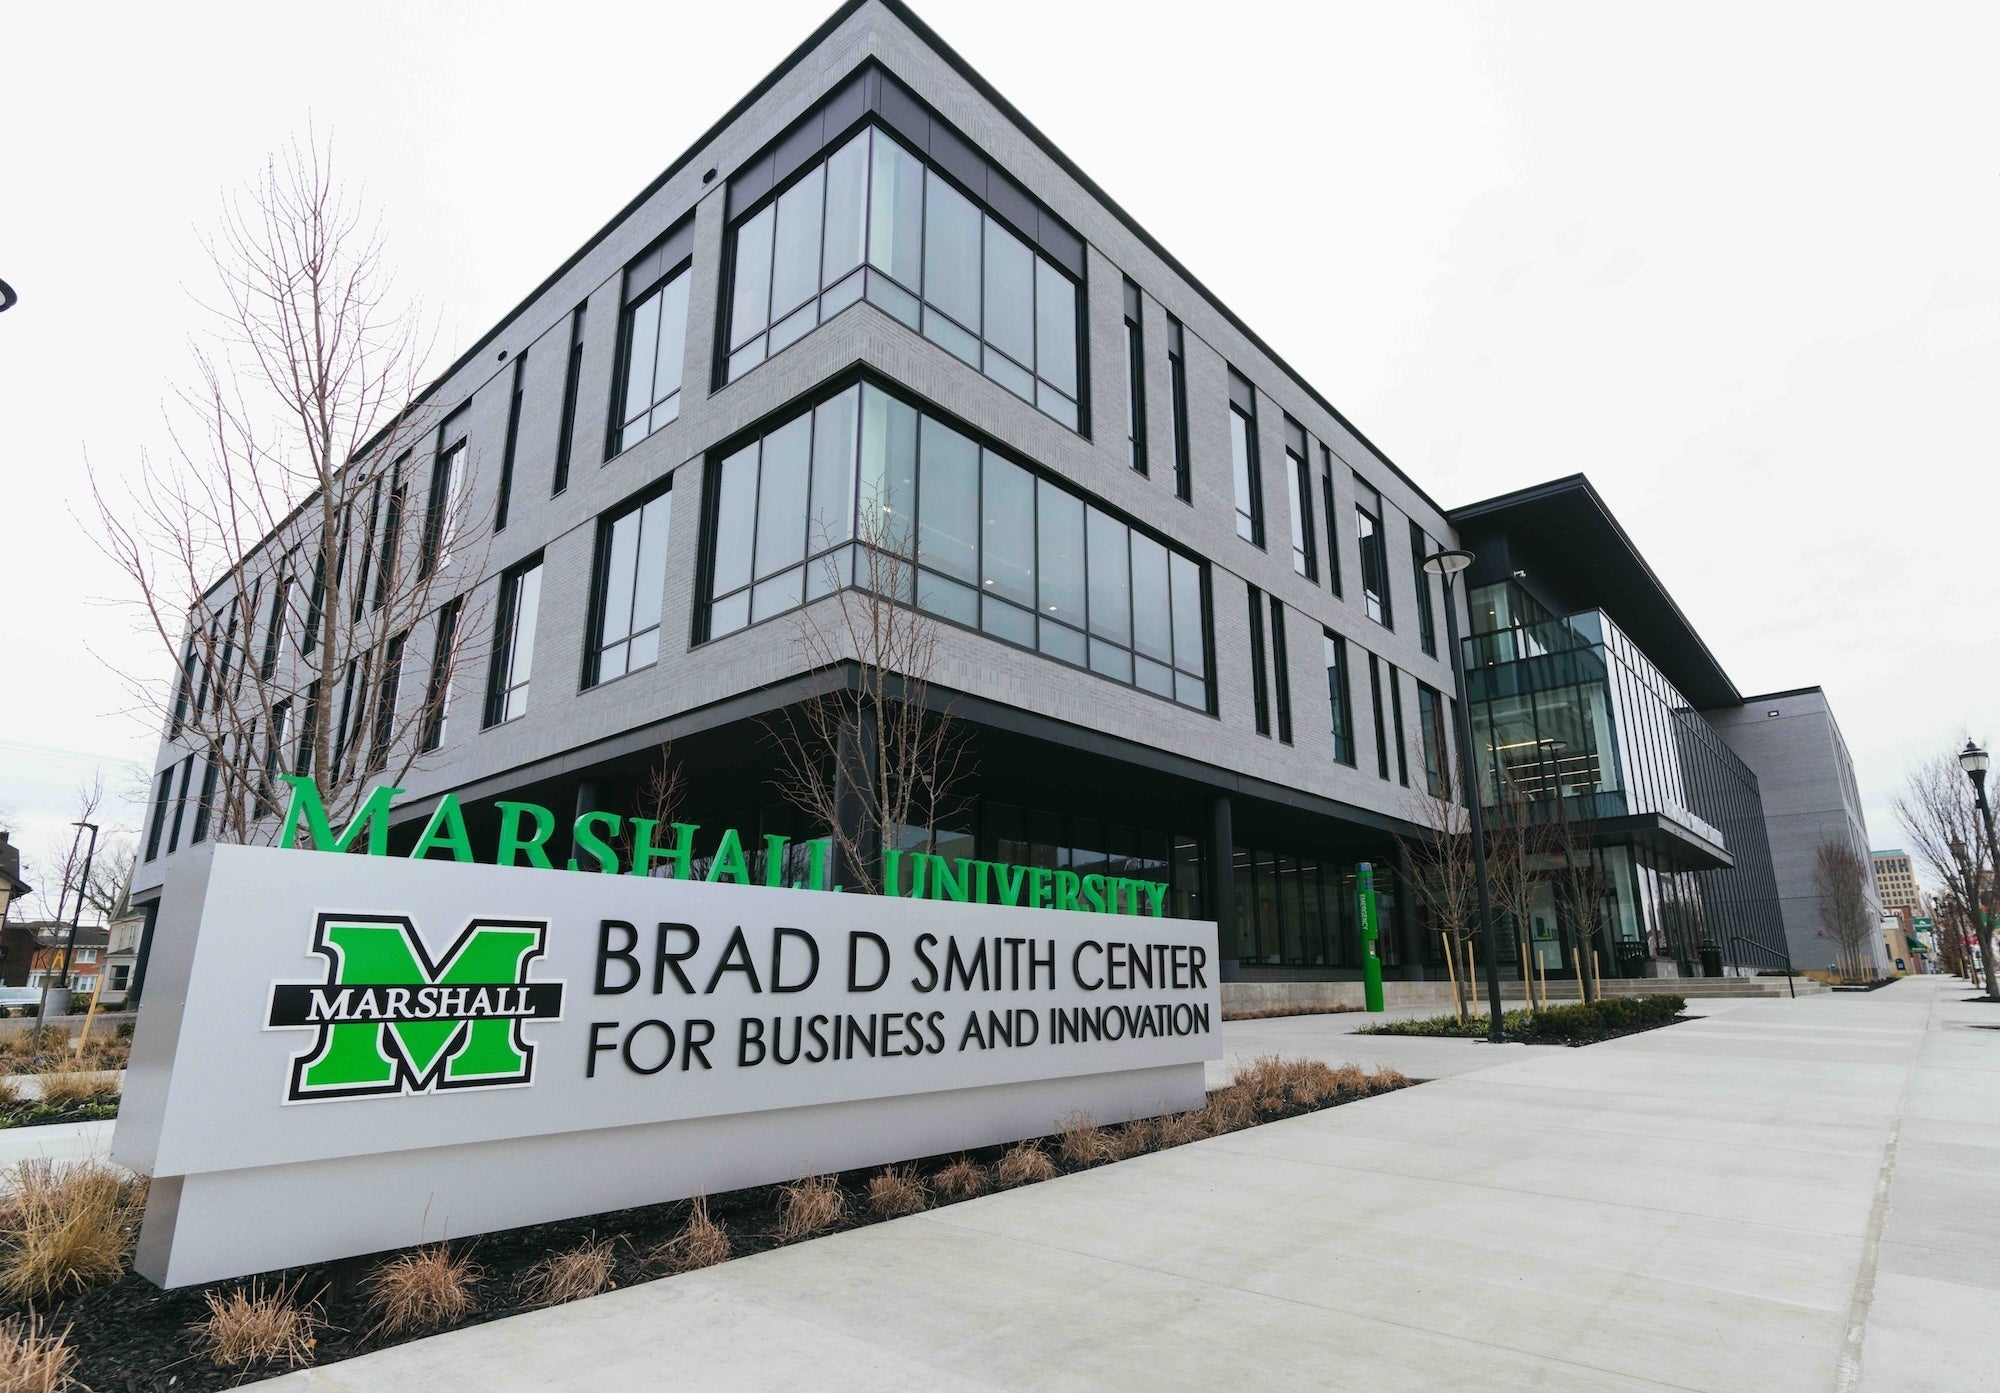 Brad D. Smith Center for Business and Innovation